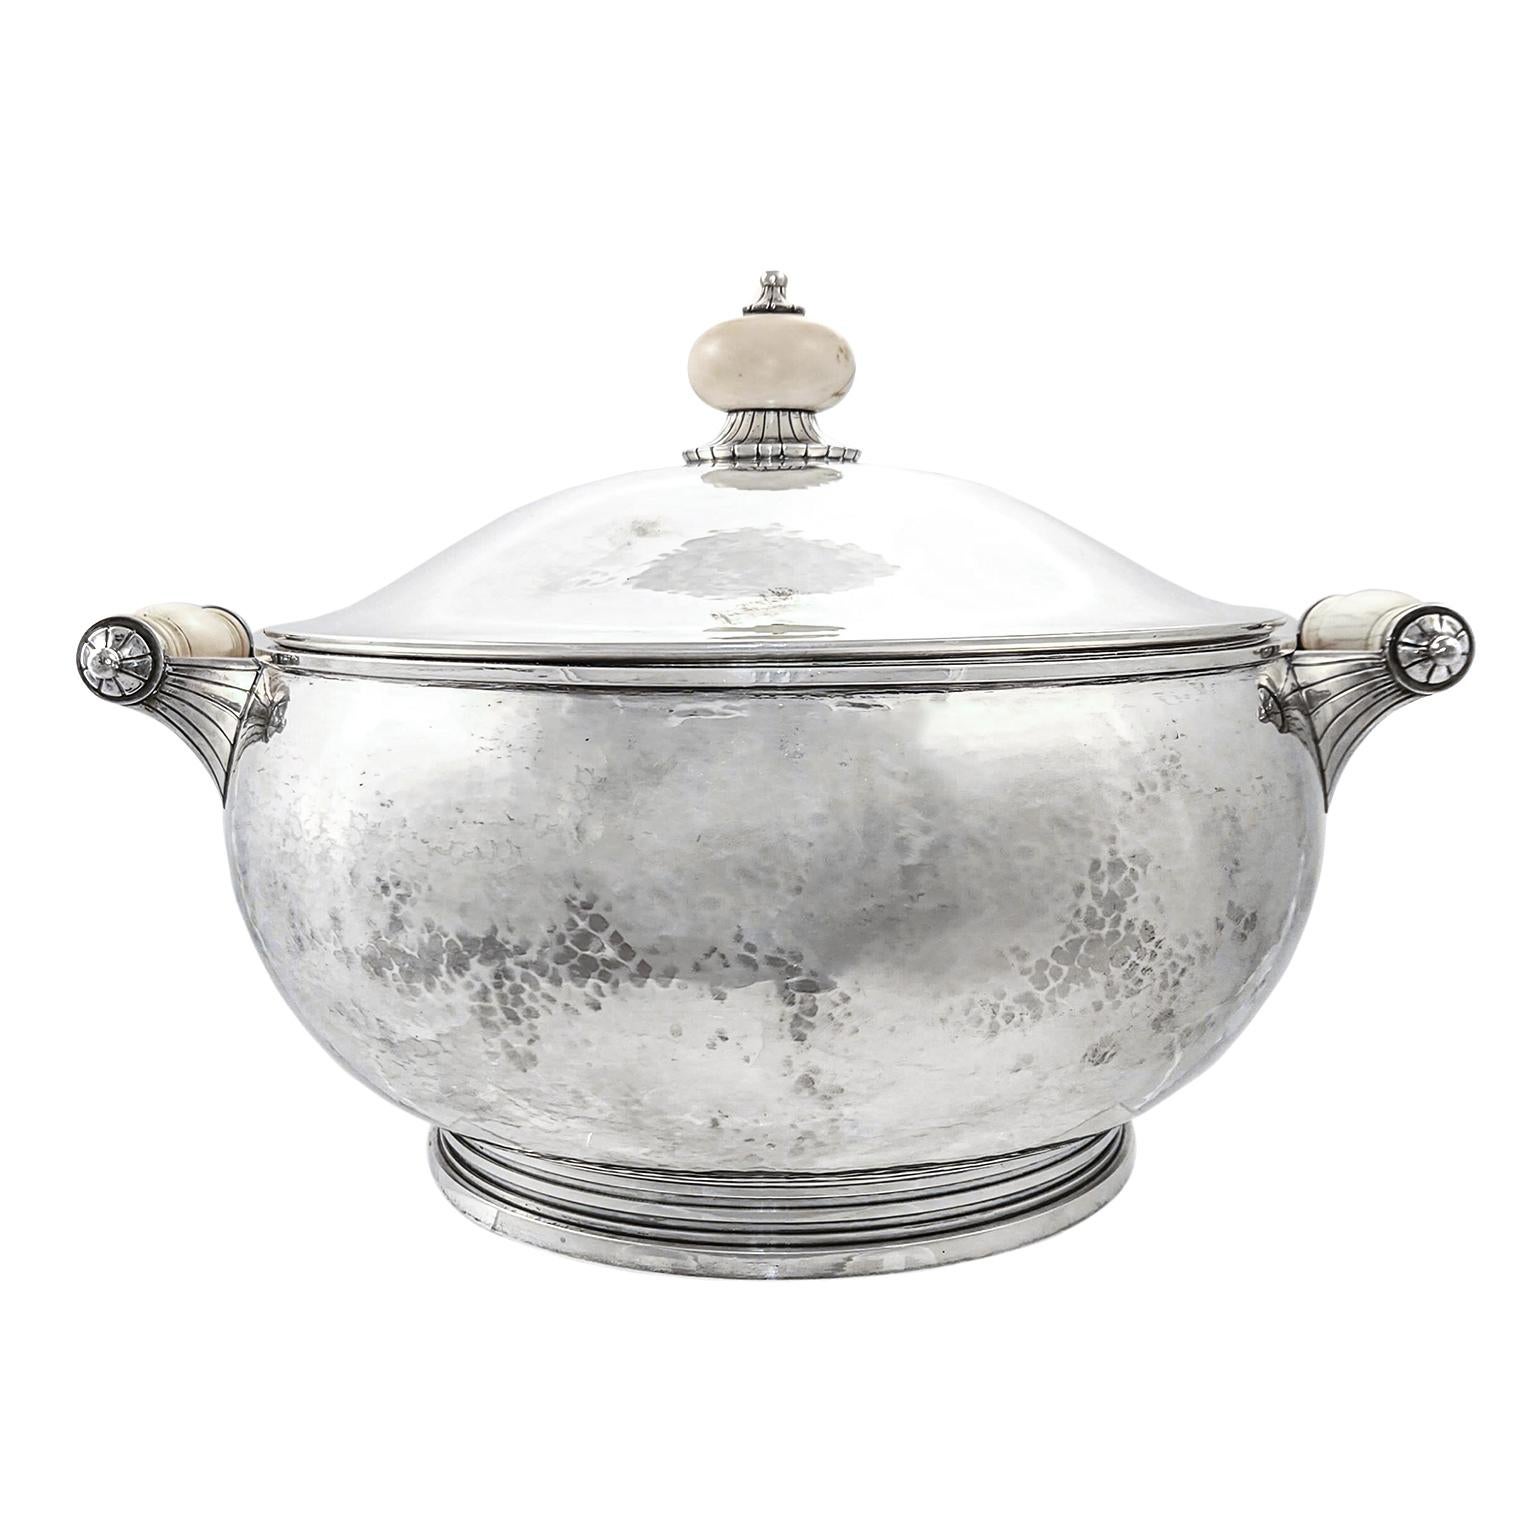 Hand-Hammered Sterling Covered Tureen by C.C. Hermann Denmark For Sale 4